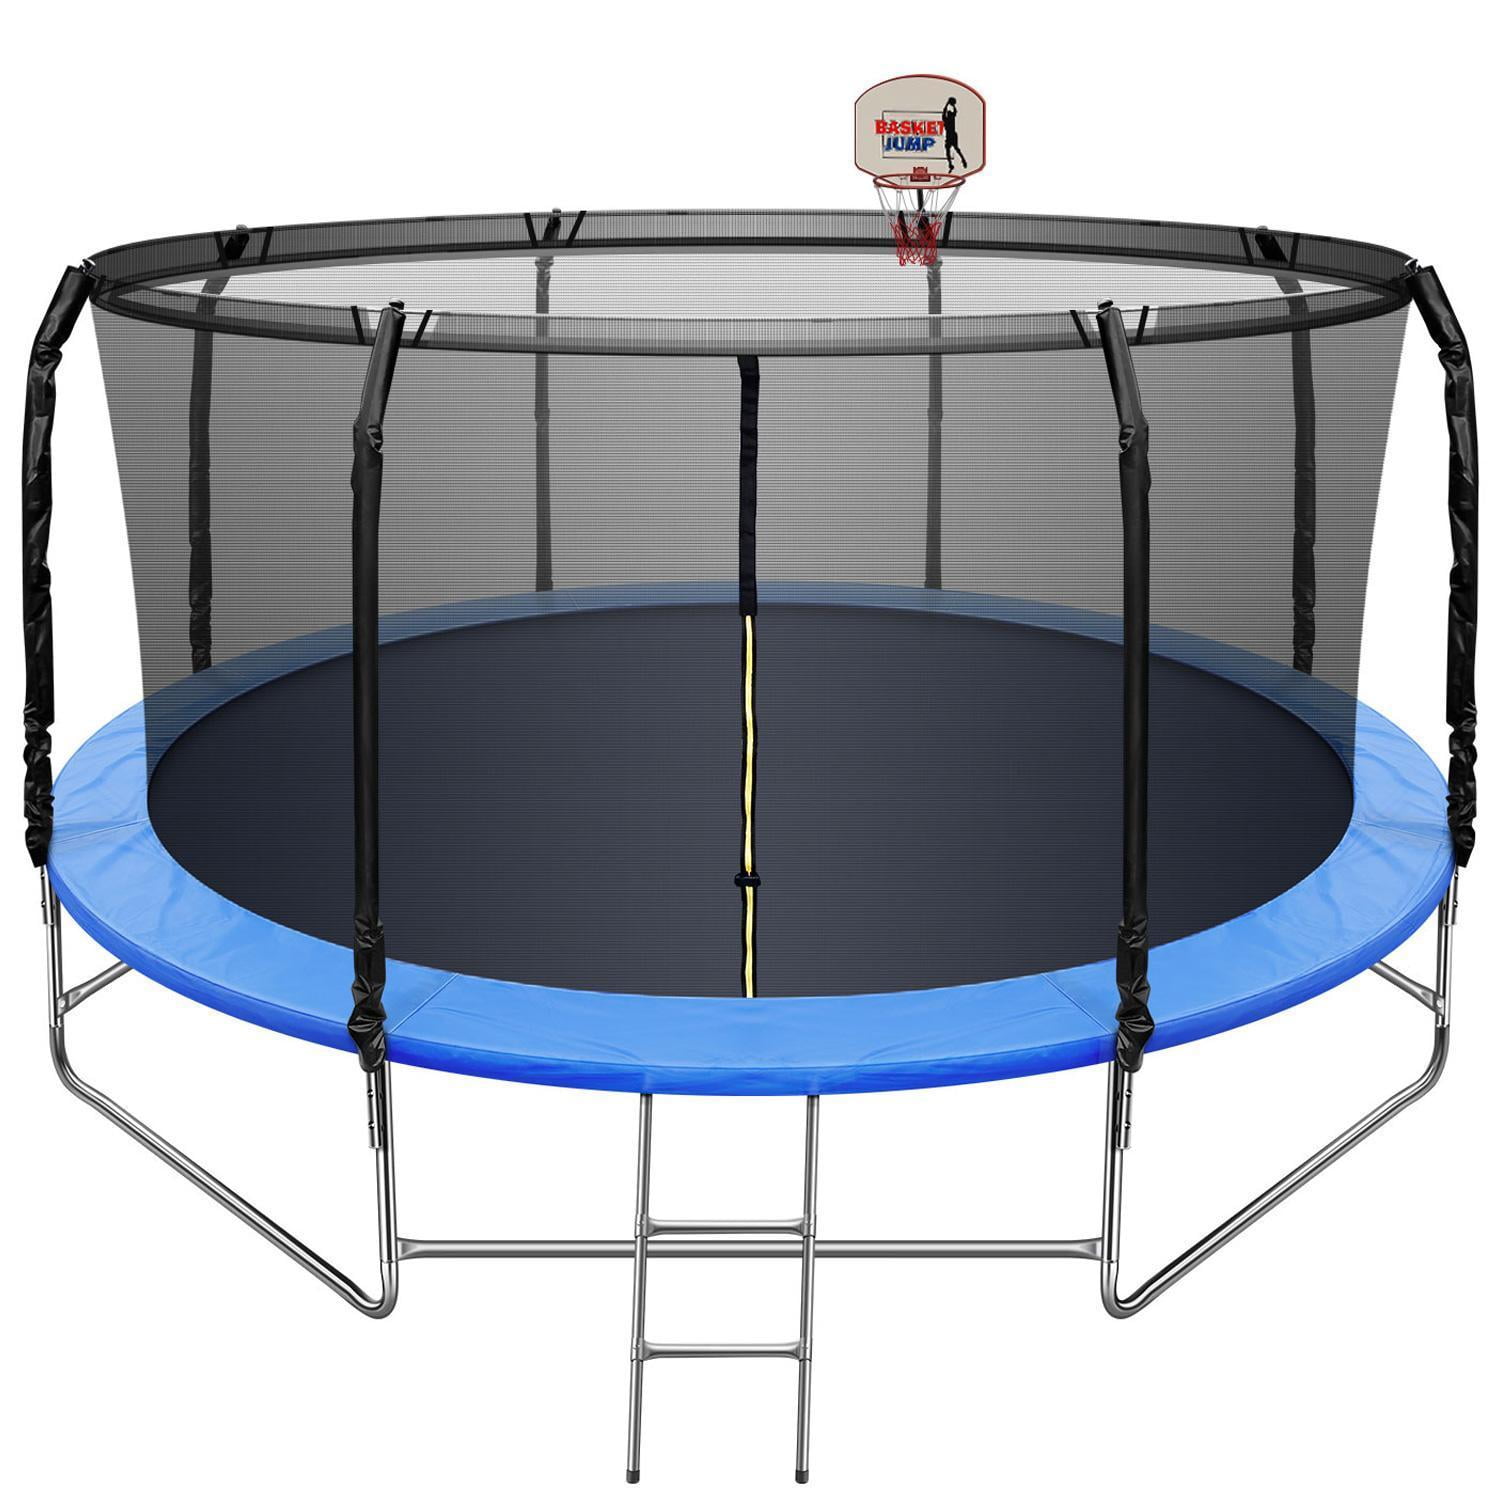 14FT Round Trampoline with Enclosure Net W/ Spring Pad Ladder 